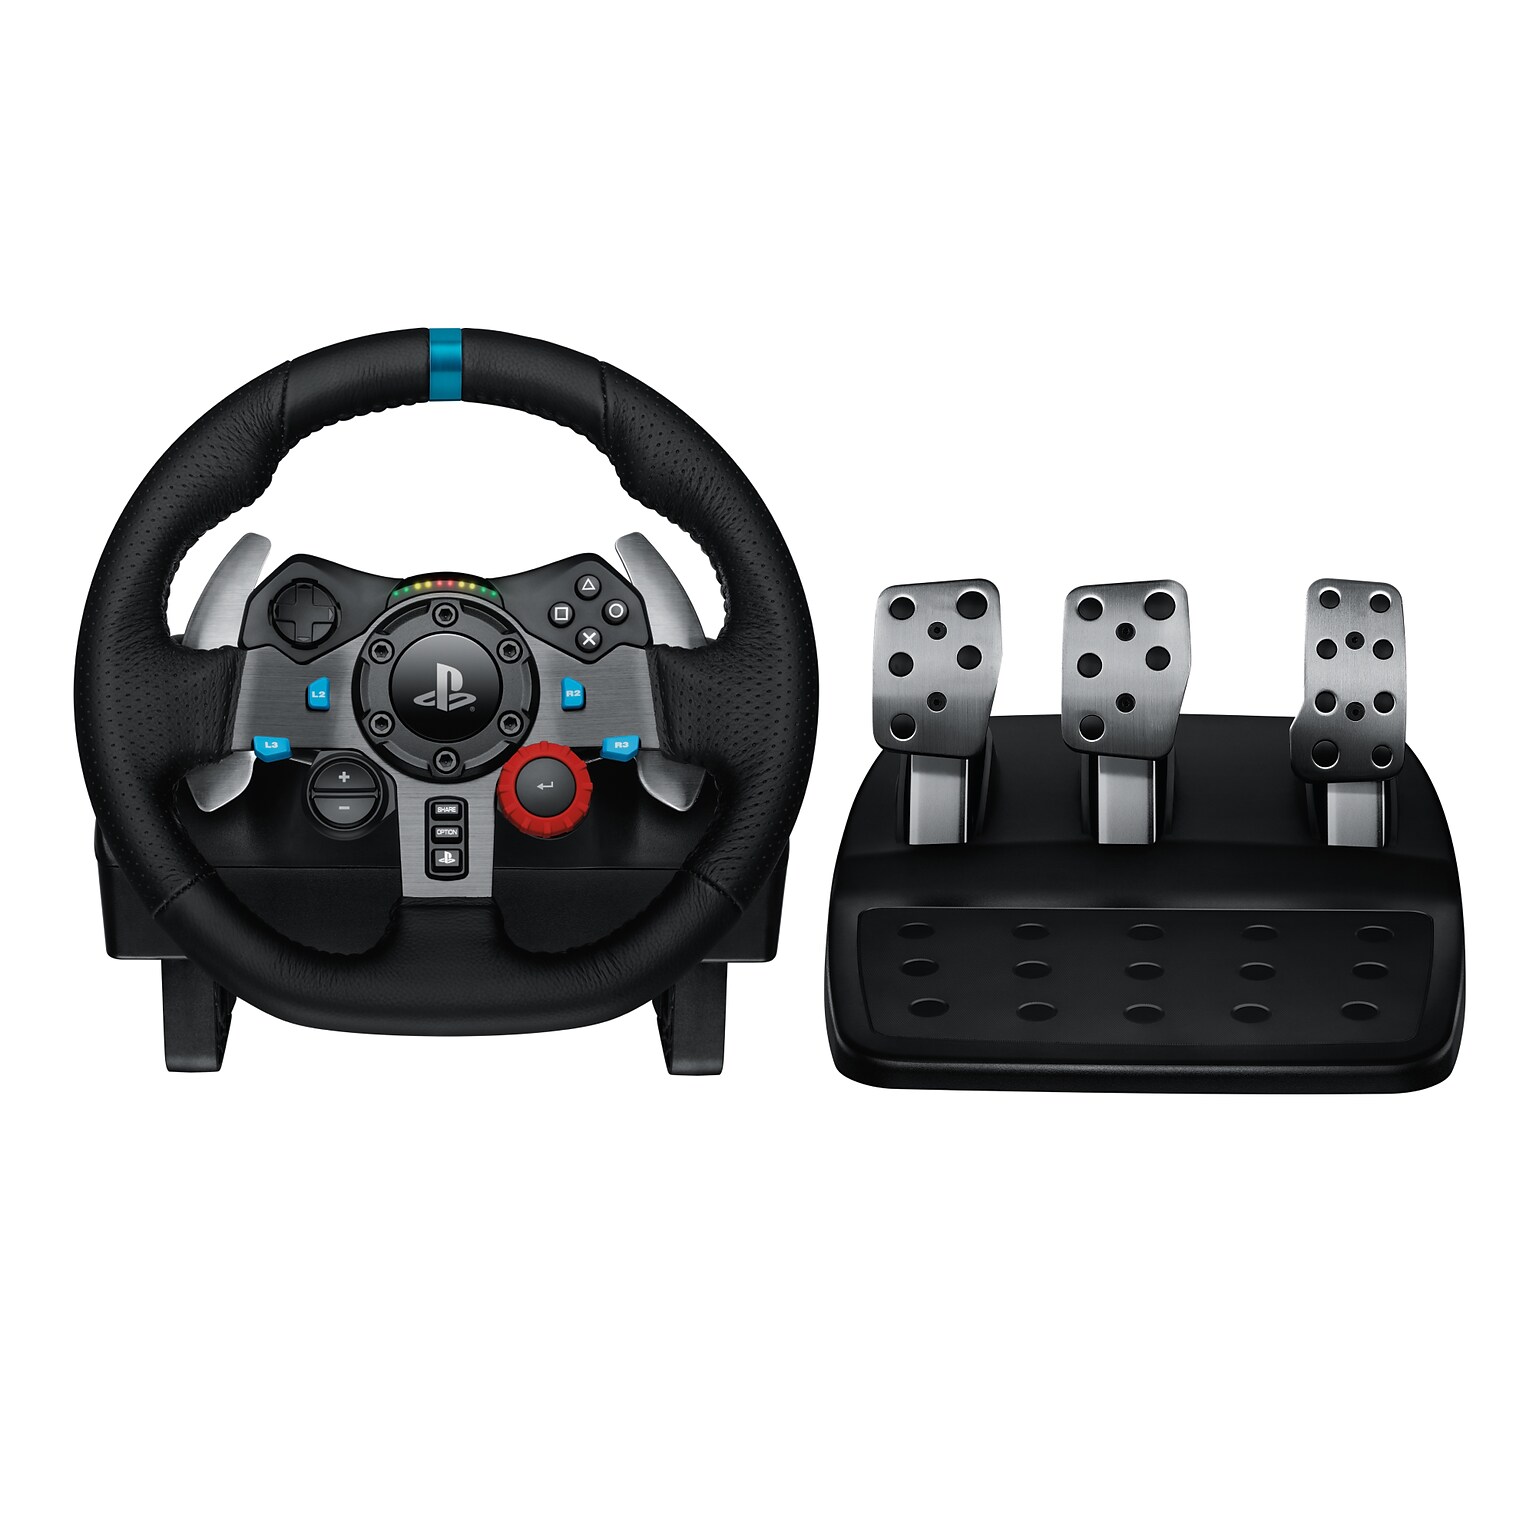 Logitech G G29 Driving Force 941-000110 Gaming Steering Wheel for PS3 & PS4, Cable, Black